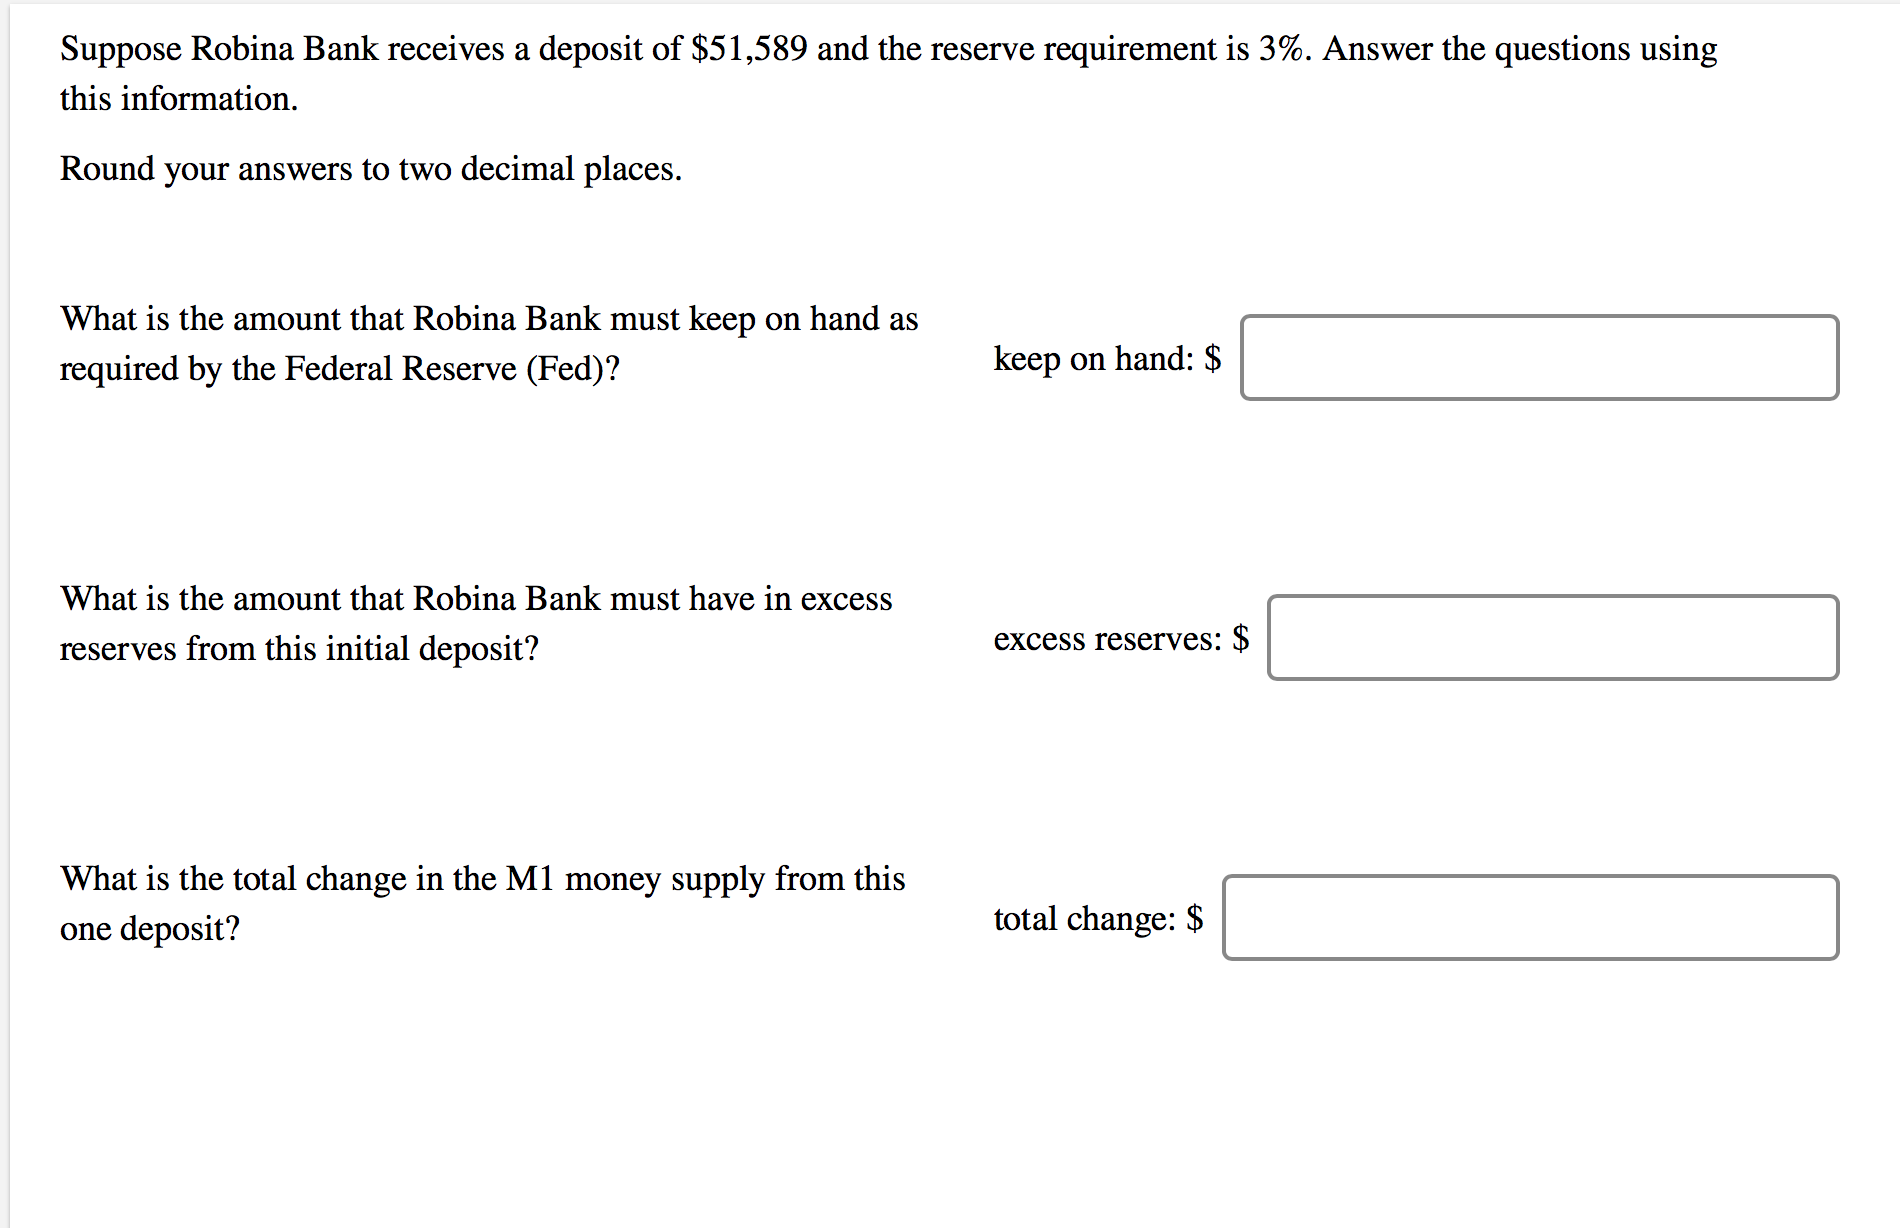 Suppose Robina Bank receives a deposit of $51,589 and the reserve requirement is 3%. Answer the questions using
this information.
Round your answers to two decimal places.
What is the amount that Robina Bank must keep on hand as
required by the Federal Reserve (Fed)?
keep on hand: $
What is the amount that Robina Bank must have in excess
reserves from this initial deposit?
excess reserves: $
What is the total change in the M1 money supply from this
one deposit?
total change: $
